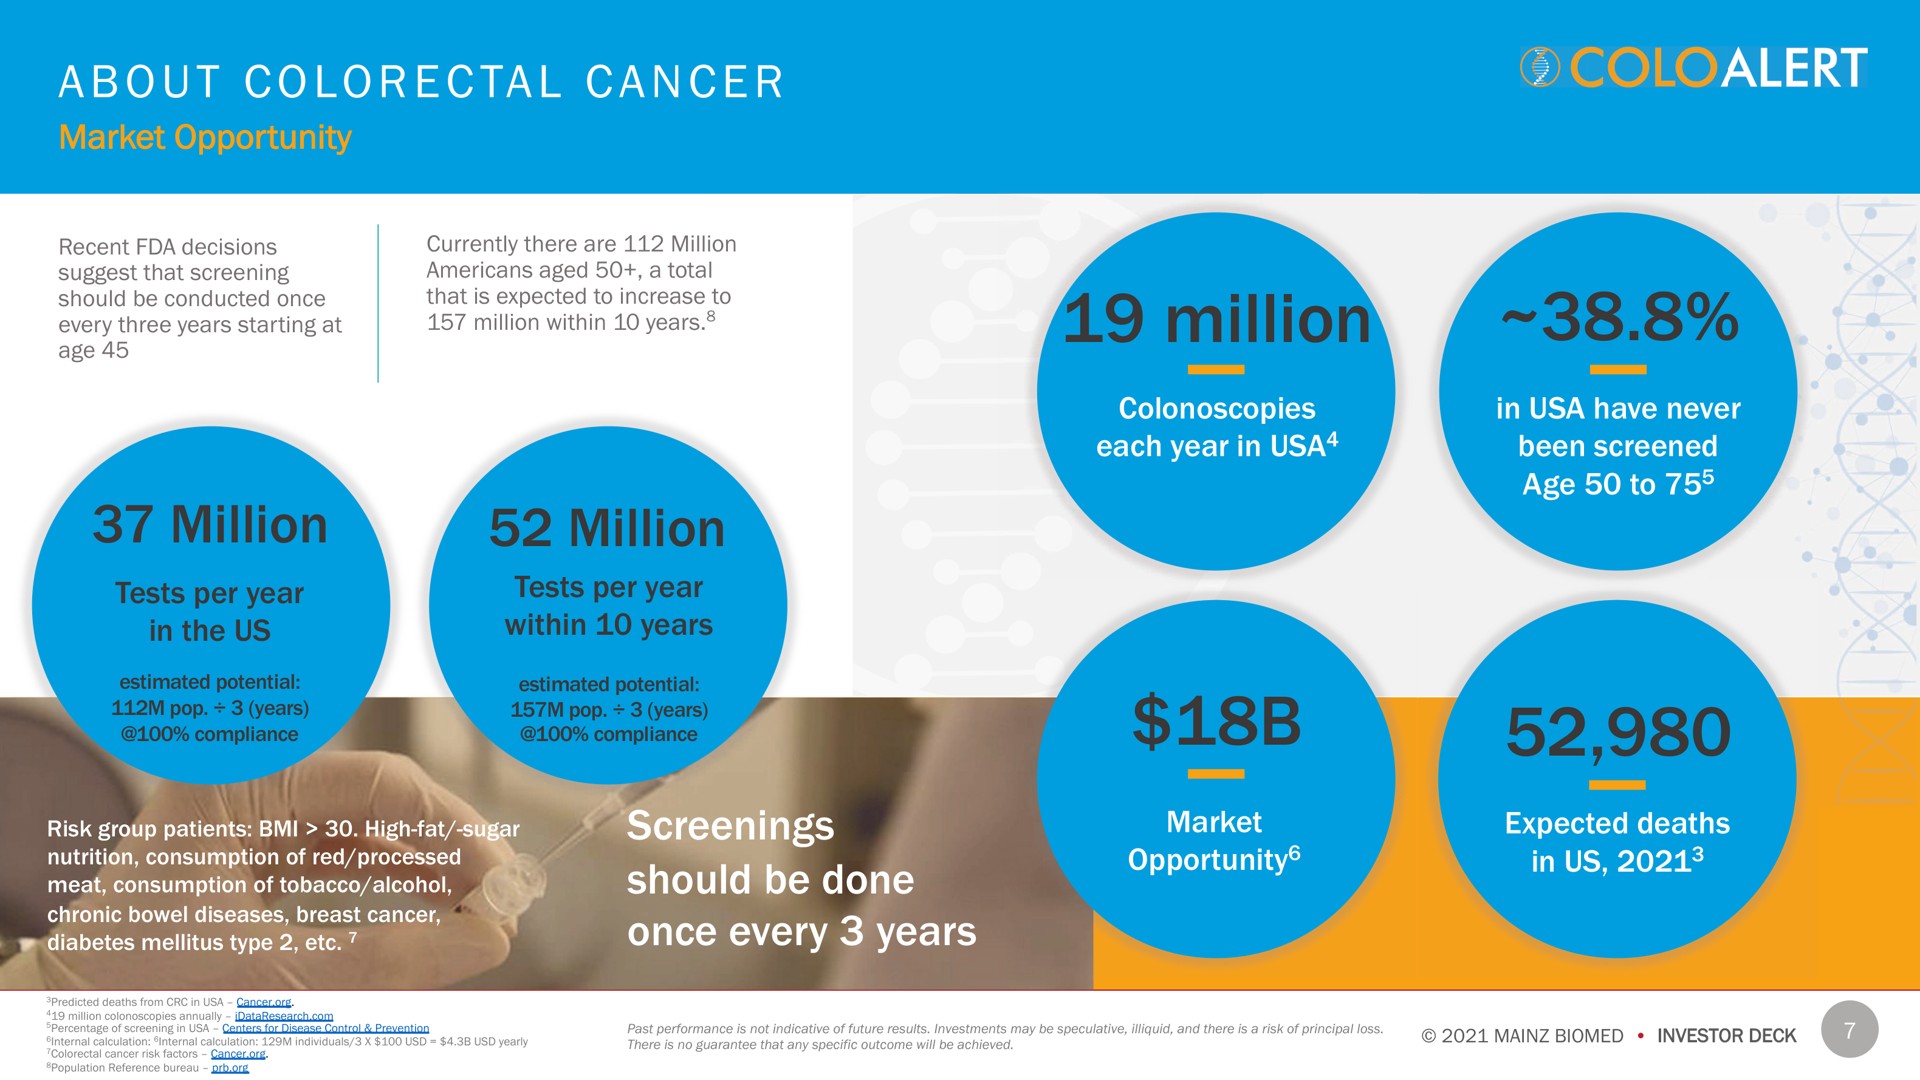 a a million million screenings should be done once every years million alert net | Mainz Biomed NV